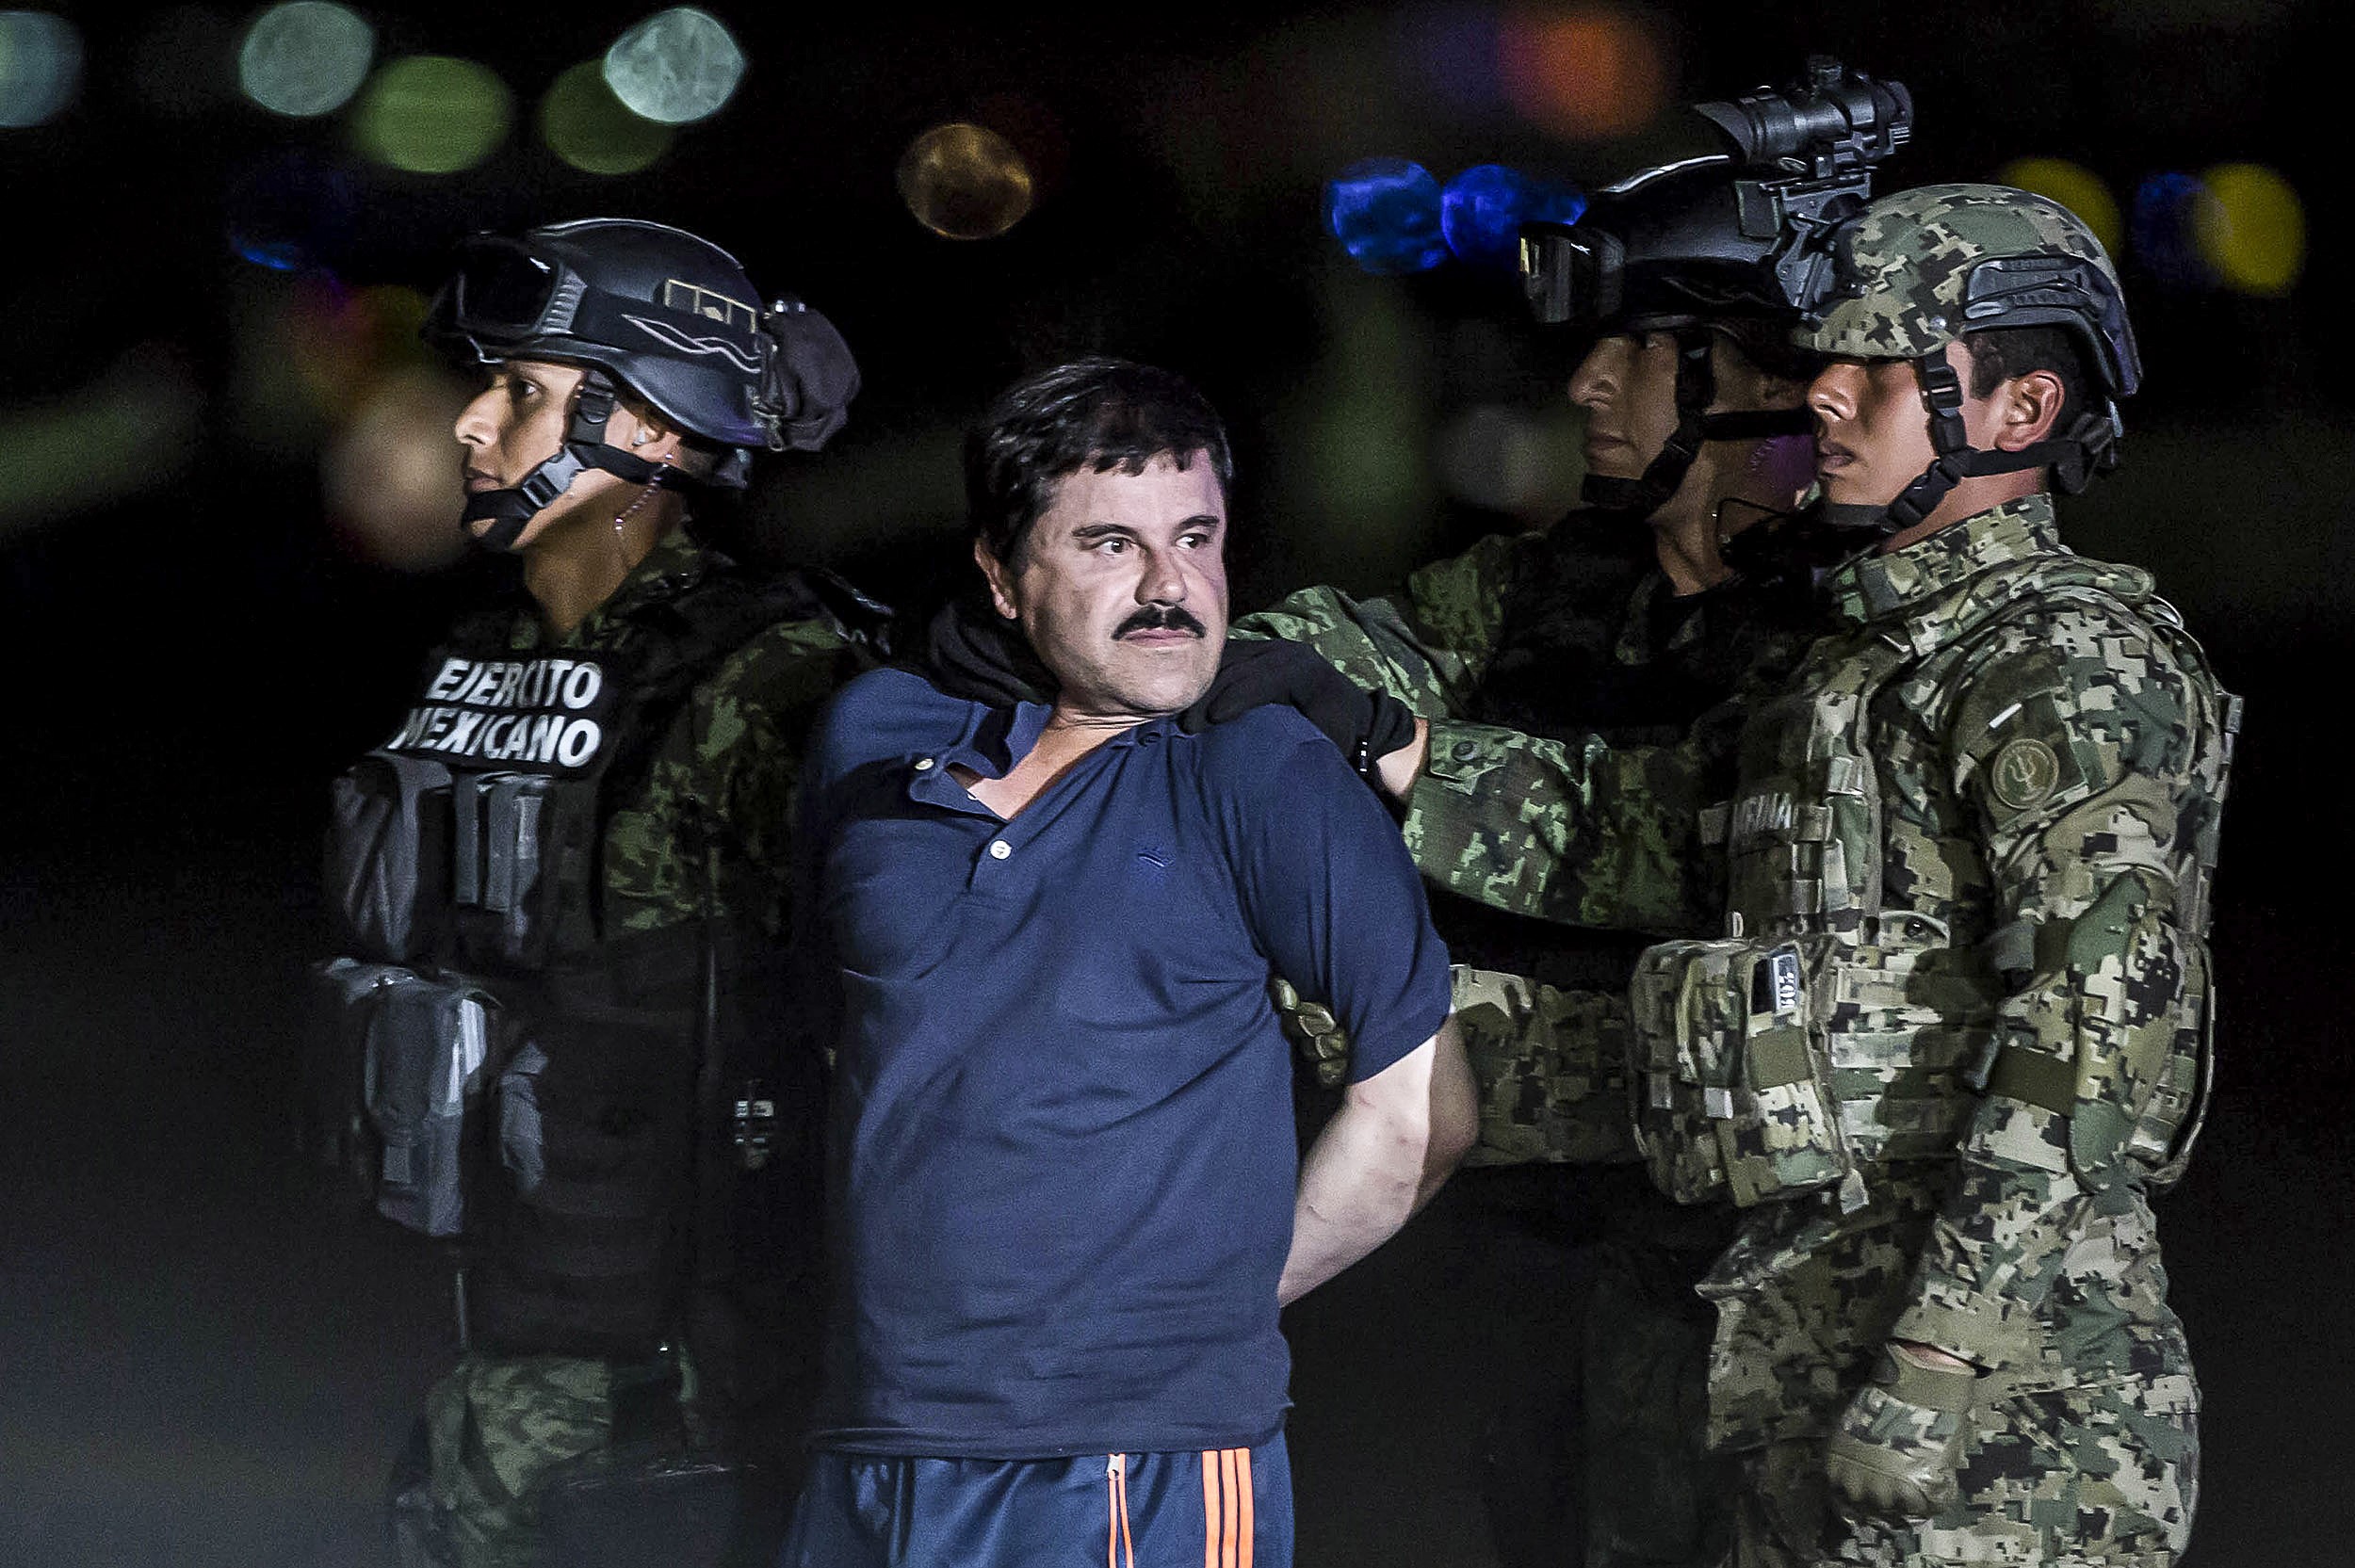 Joaquin Guzman Loera, also known as "El Chapo" is transported to Maximum Security Prison of El Altiplano in Mexico City, Mexico on January 08, 2016. (Anadolu Agency—Getty)